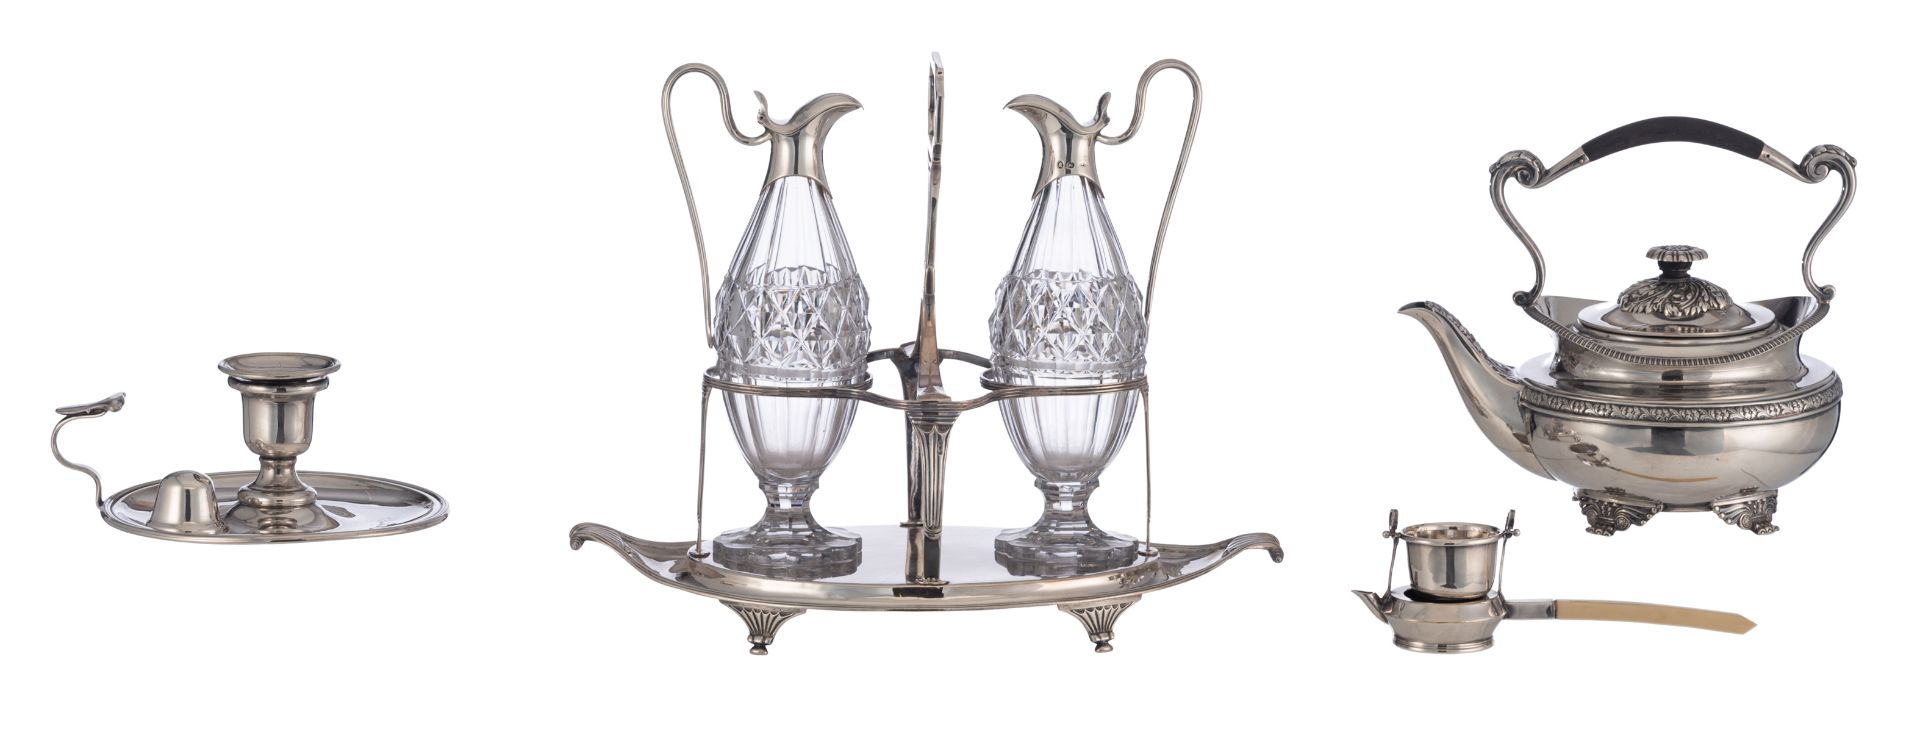 Four 19th & 20thC silver items consisting of an oil and vinegar set with its original cut crystal fl